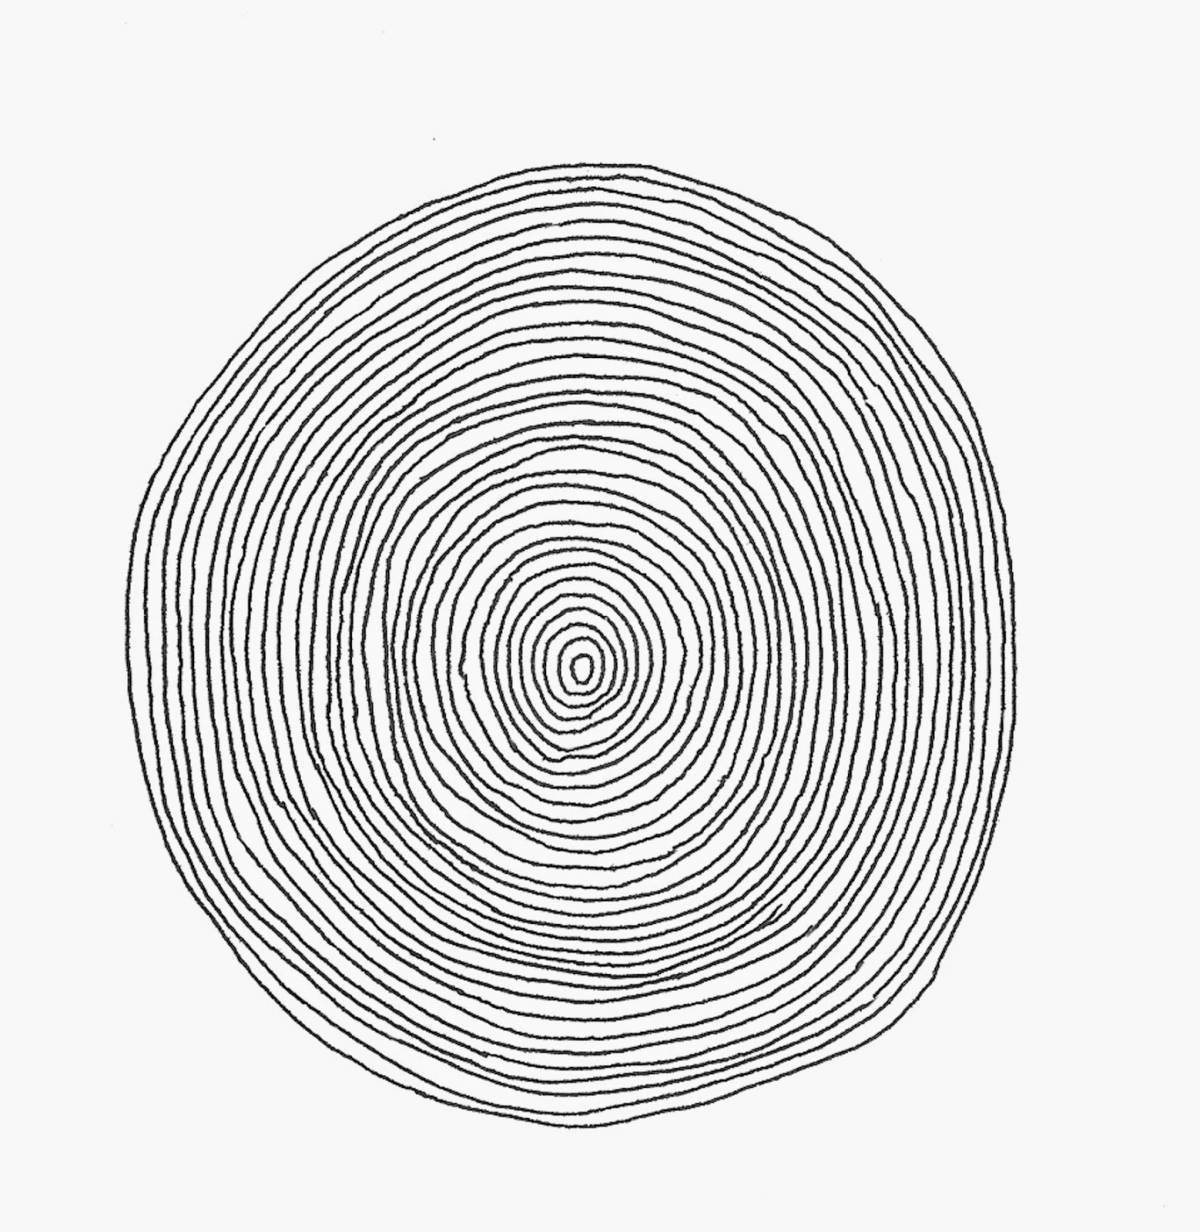 Fascinating spiral pattern coloring page